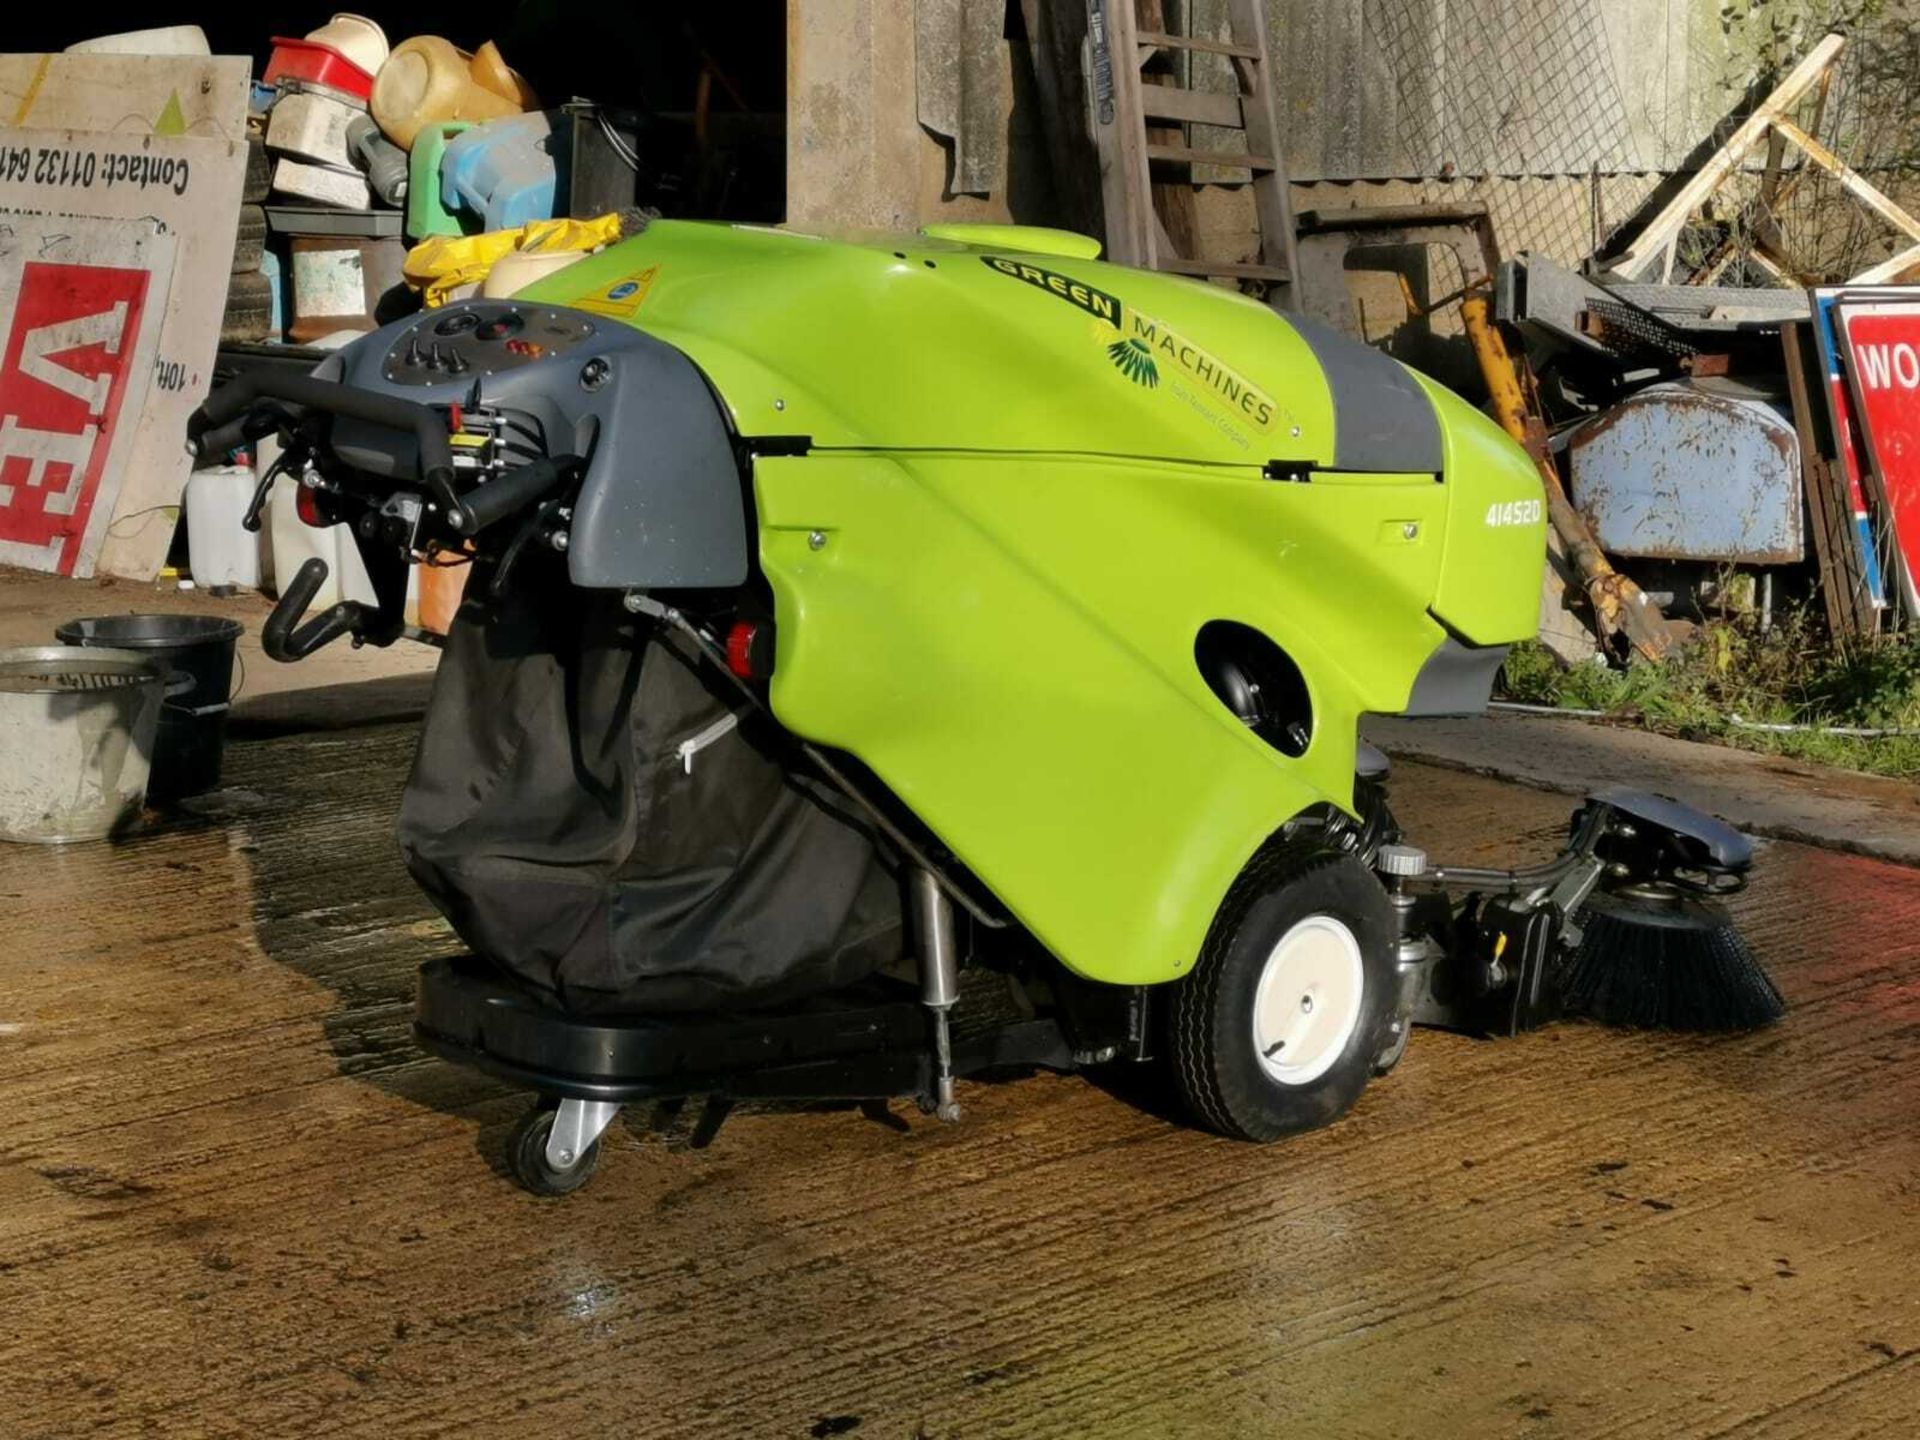 TENNANT GREEN MACHINE MODEL: 414S2D PEDESTRIAN SWEEPER, ONLY 243 HOURS, YEAR 11/2013 *PLUS VAT* - Image 9 of 11